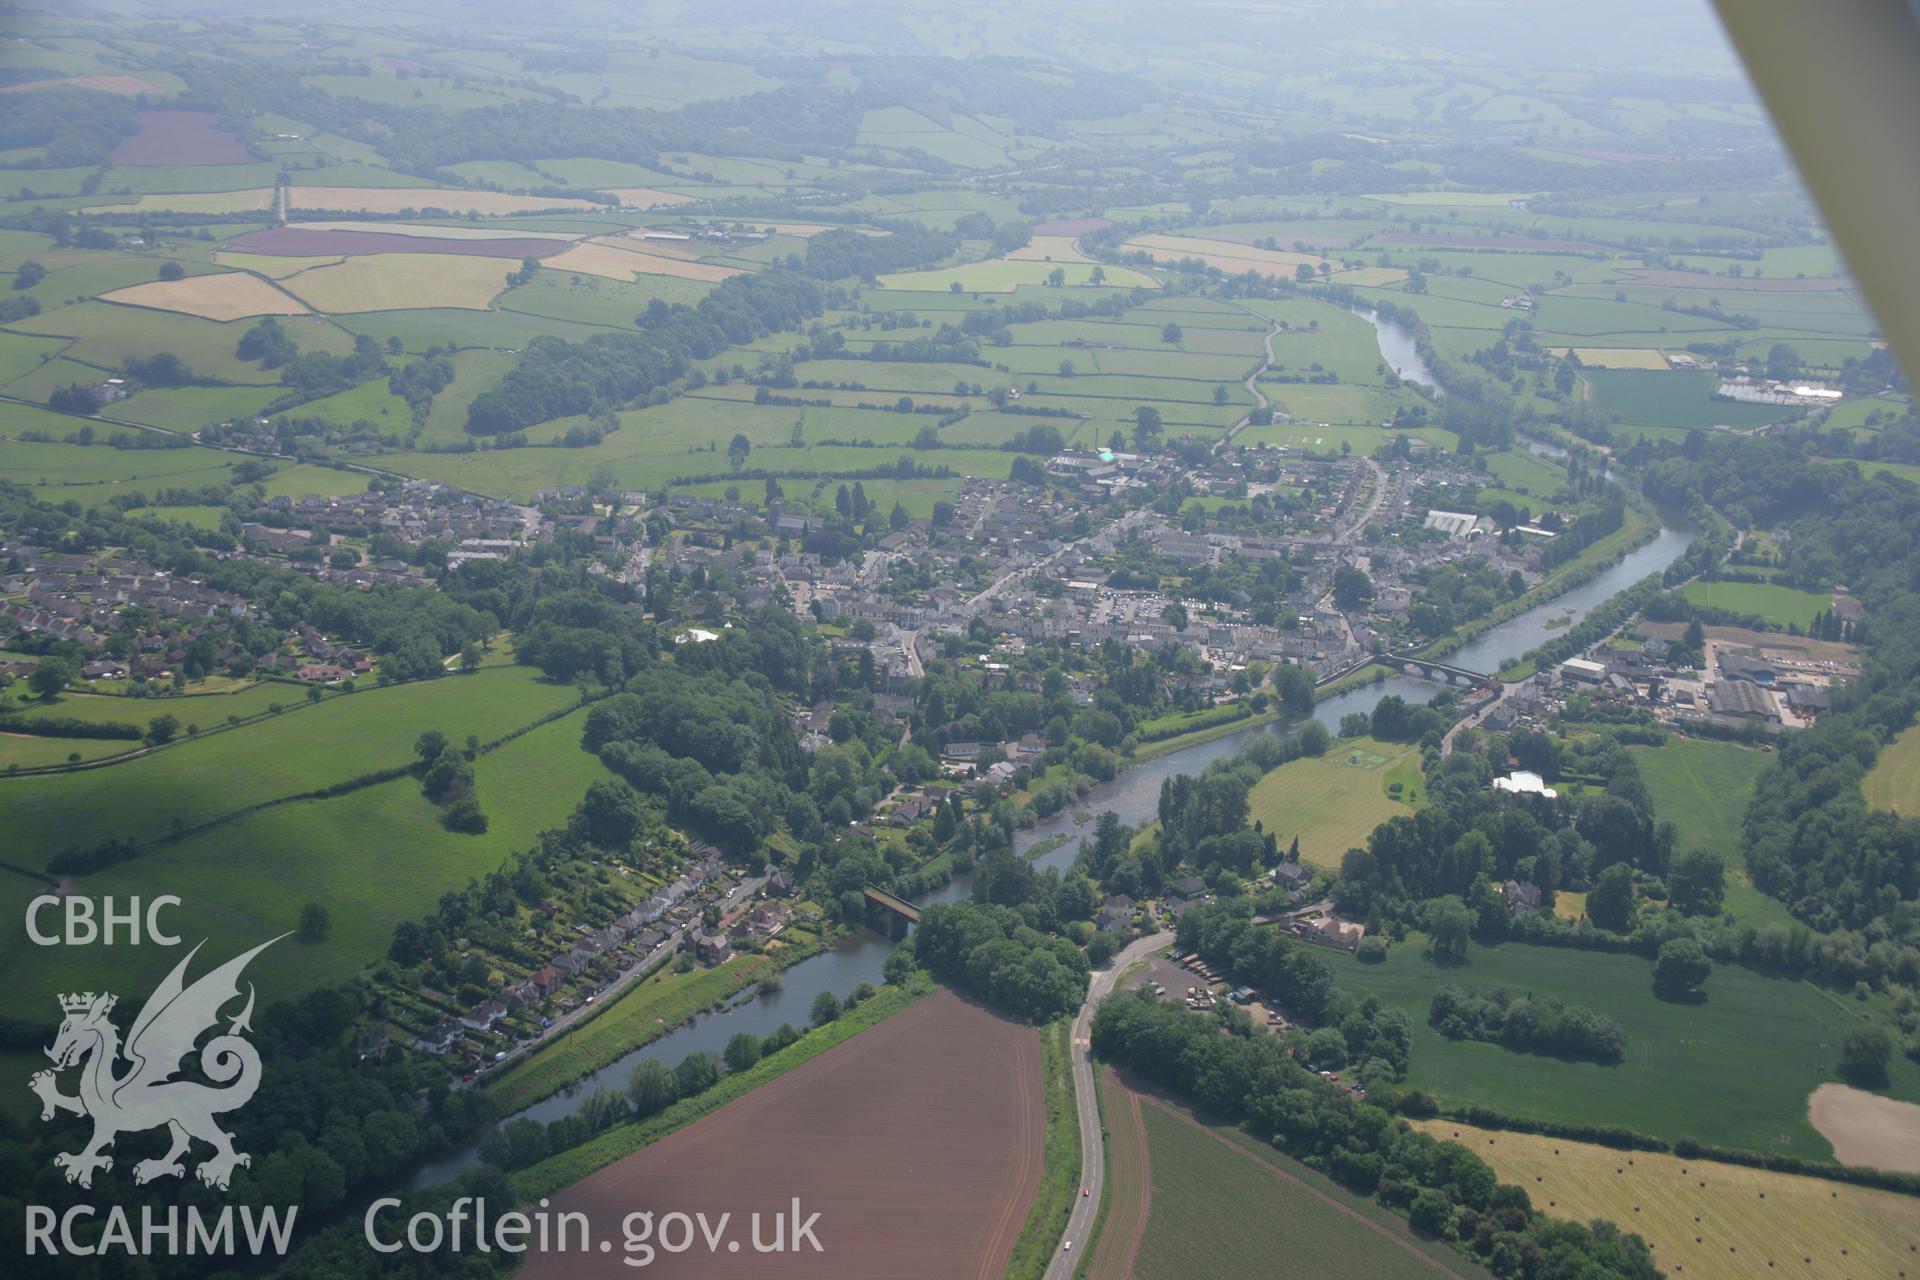 RCAHMW colour oblique aerial photograph of Usk from the north-west. Taken on 09 June 2006 by Toby Driver.